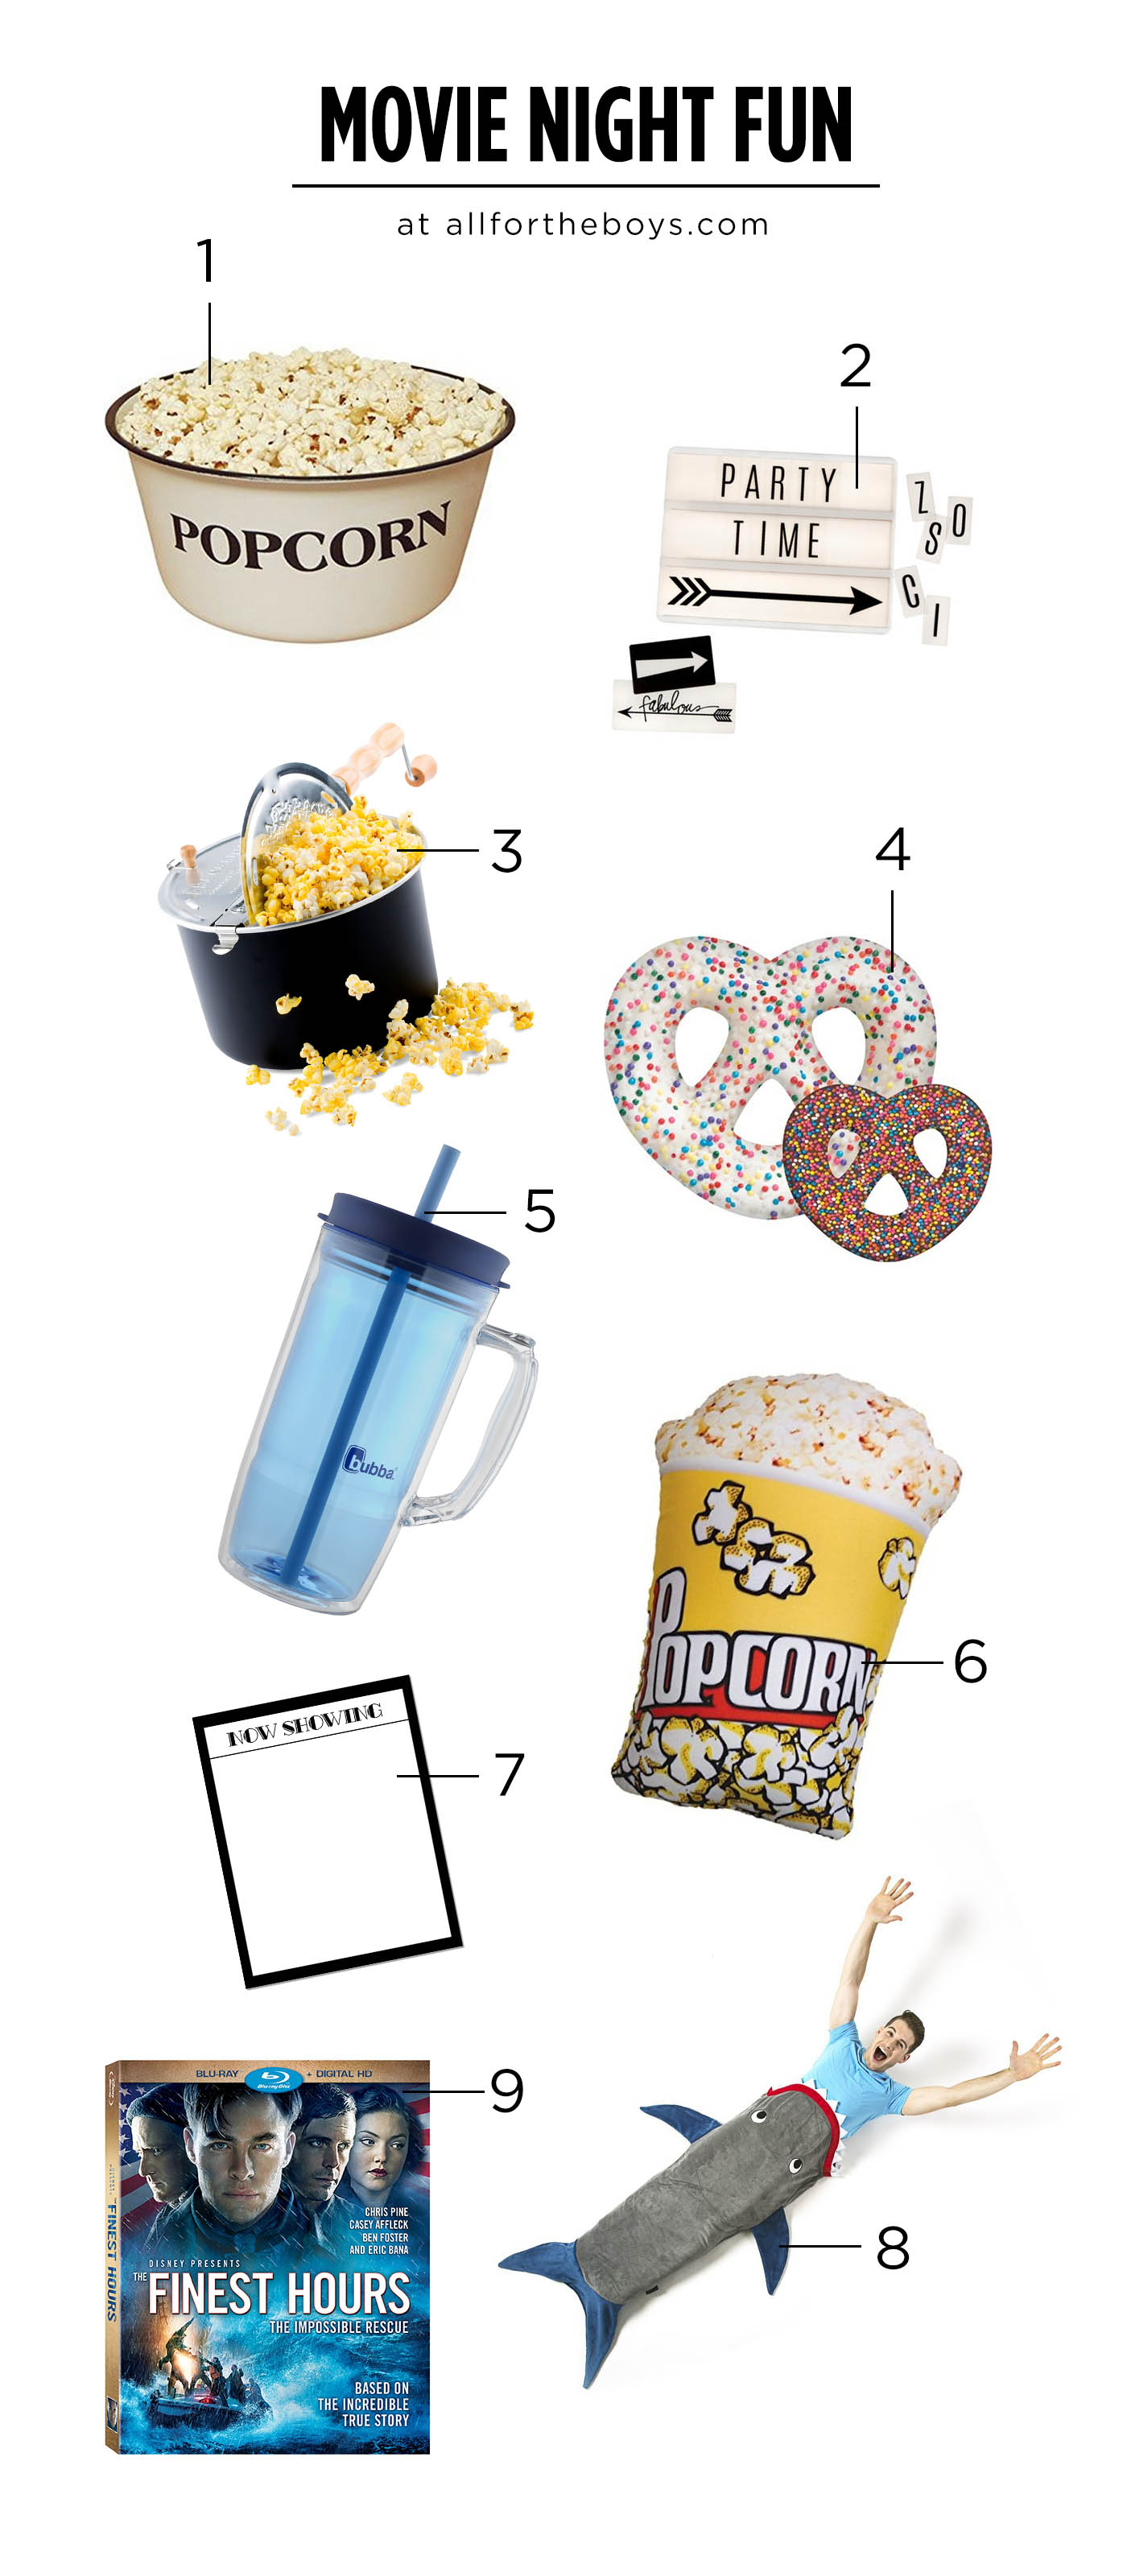 Products to make movie night extra fun at home!